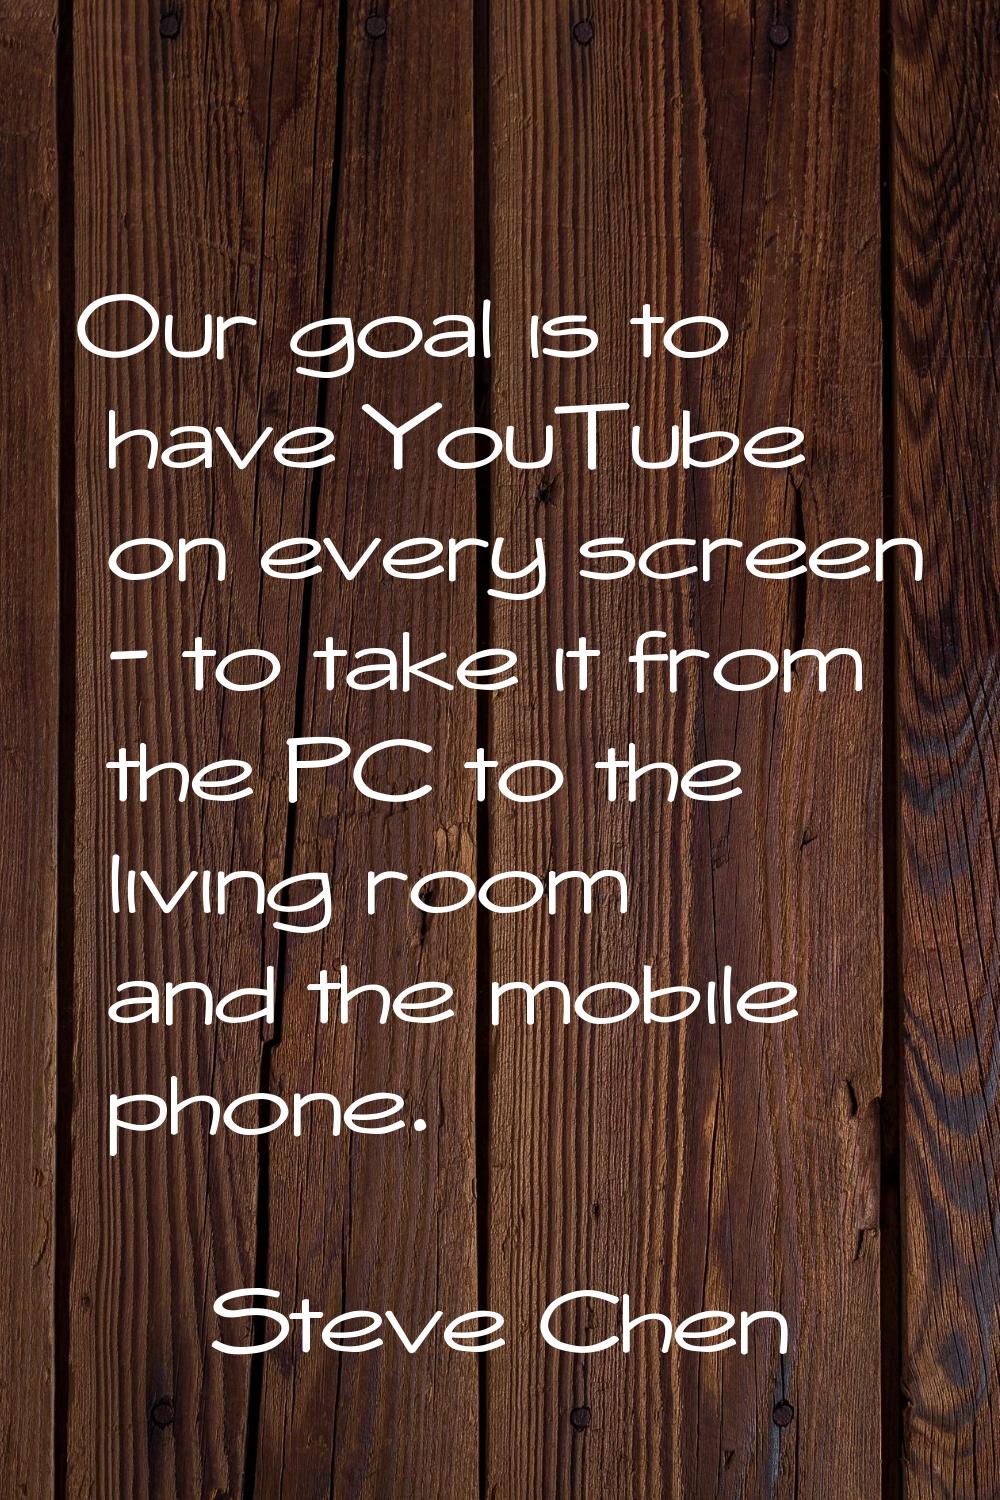 Our goal is to have YouTube on every screen - to take it from the PC to the living room and the mob